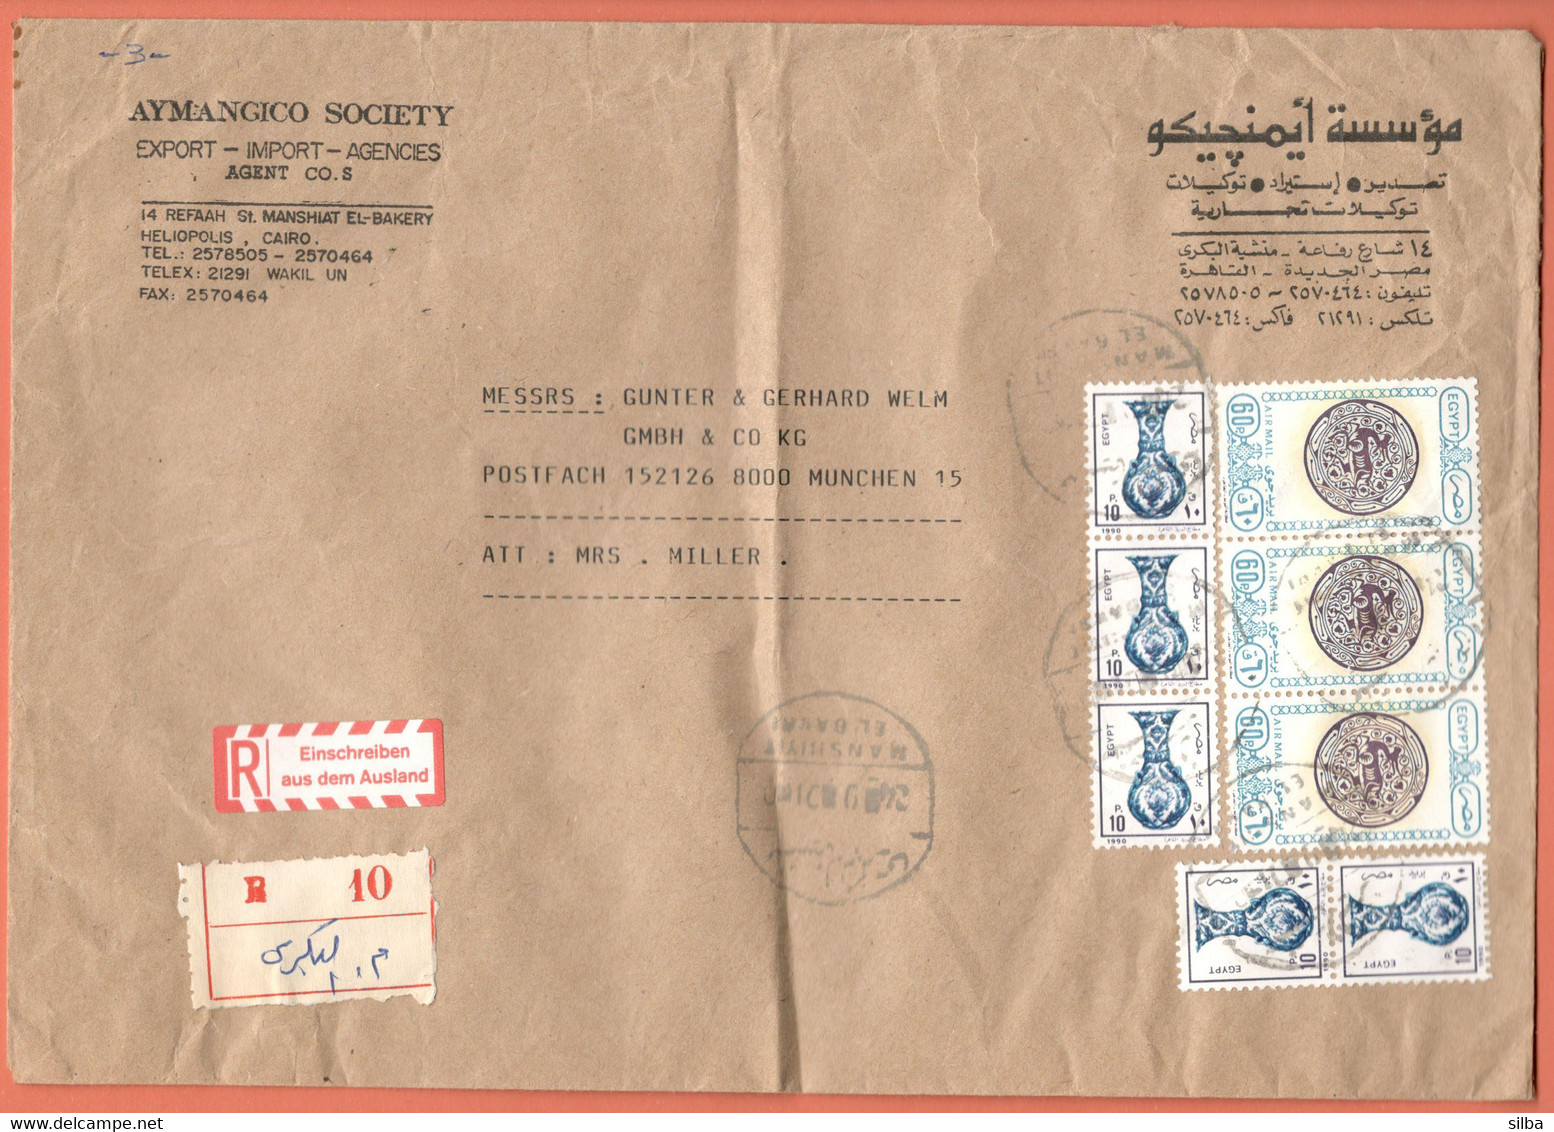 Egypt / Airmail - Art And Mosques, Dish With Gazelle Motif - 60 P, Vase 10 P, 1990 - Briefe U. Dokumente